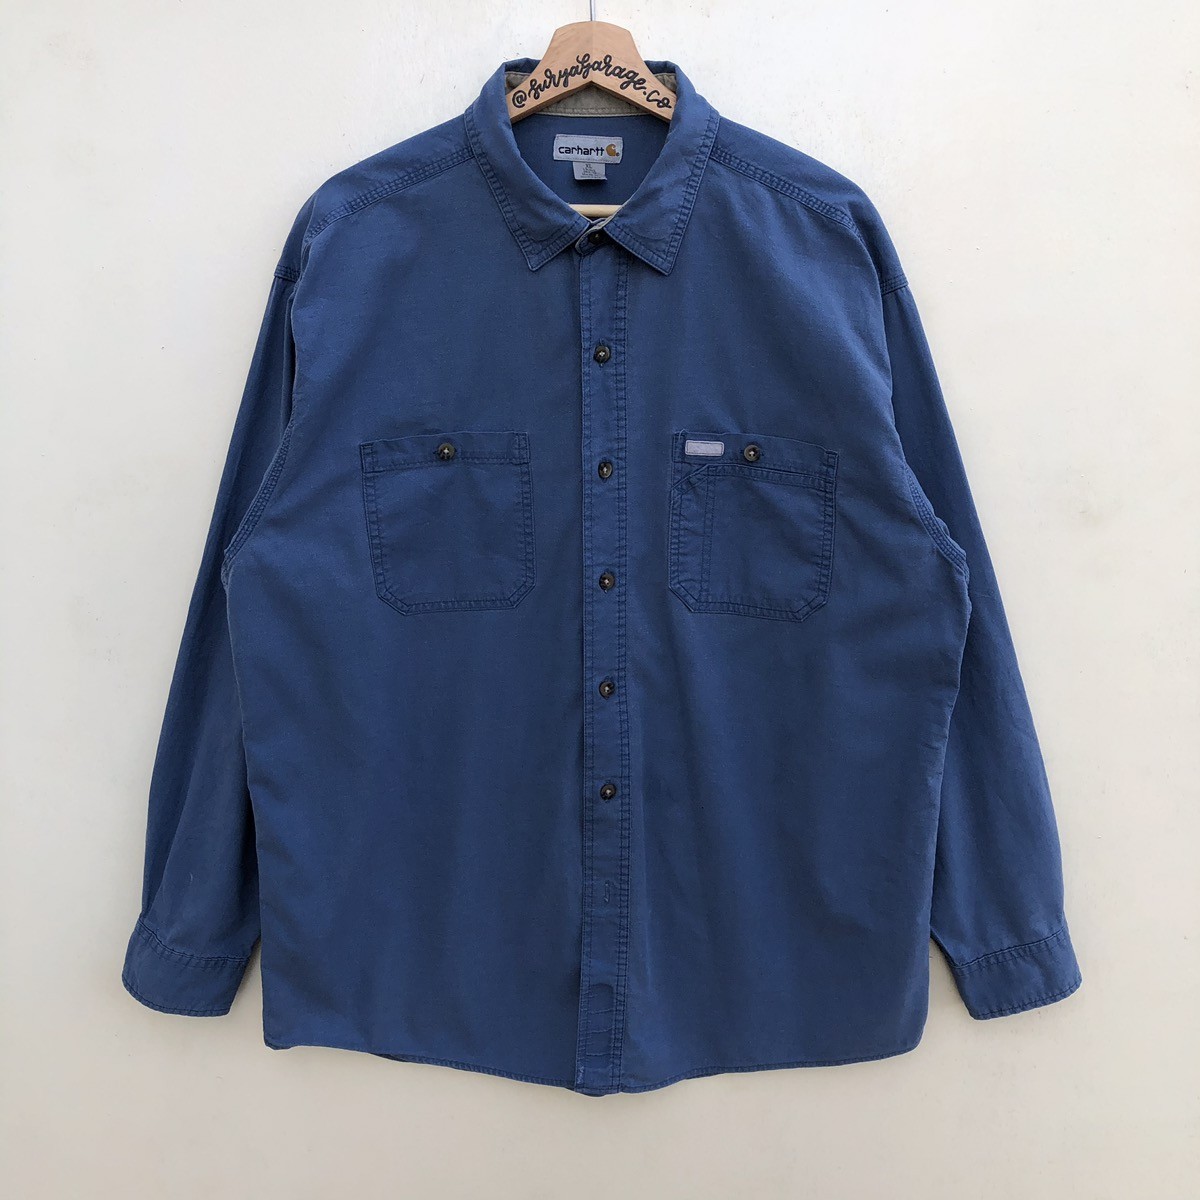 Cowley “Designed Exclusively For Rental” Shirt - 1